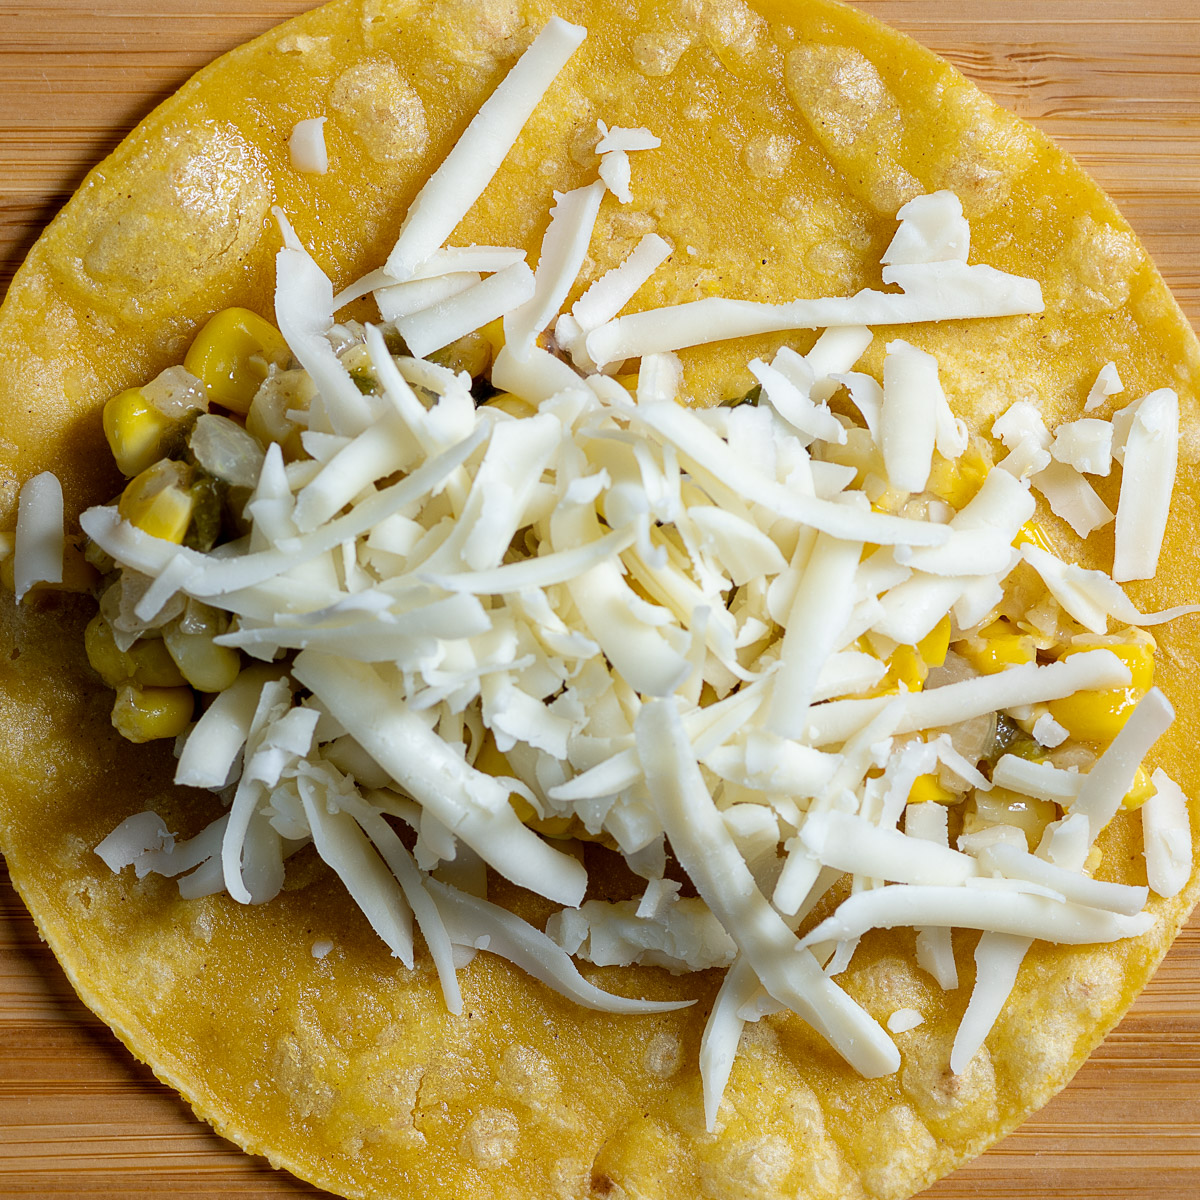 Add grated cheese to the enchilada.